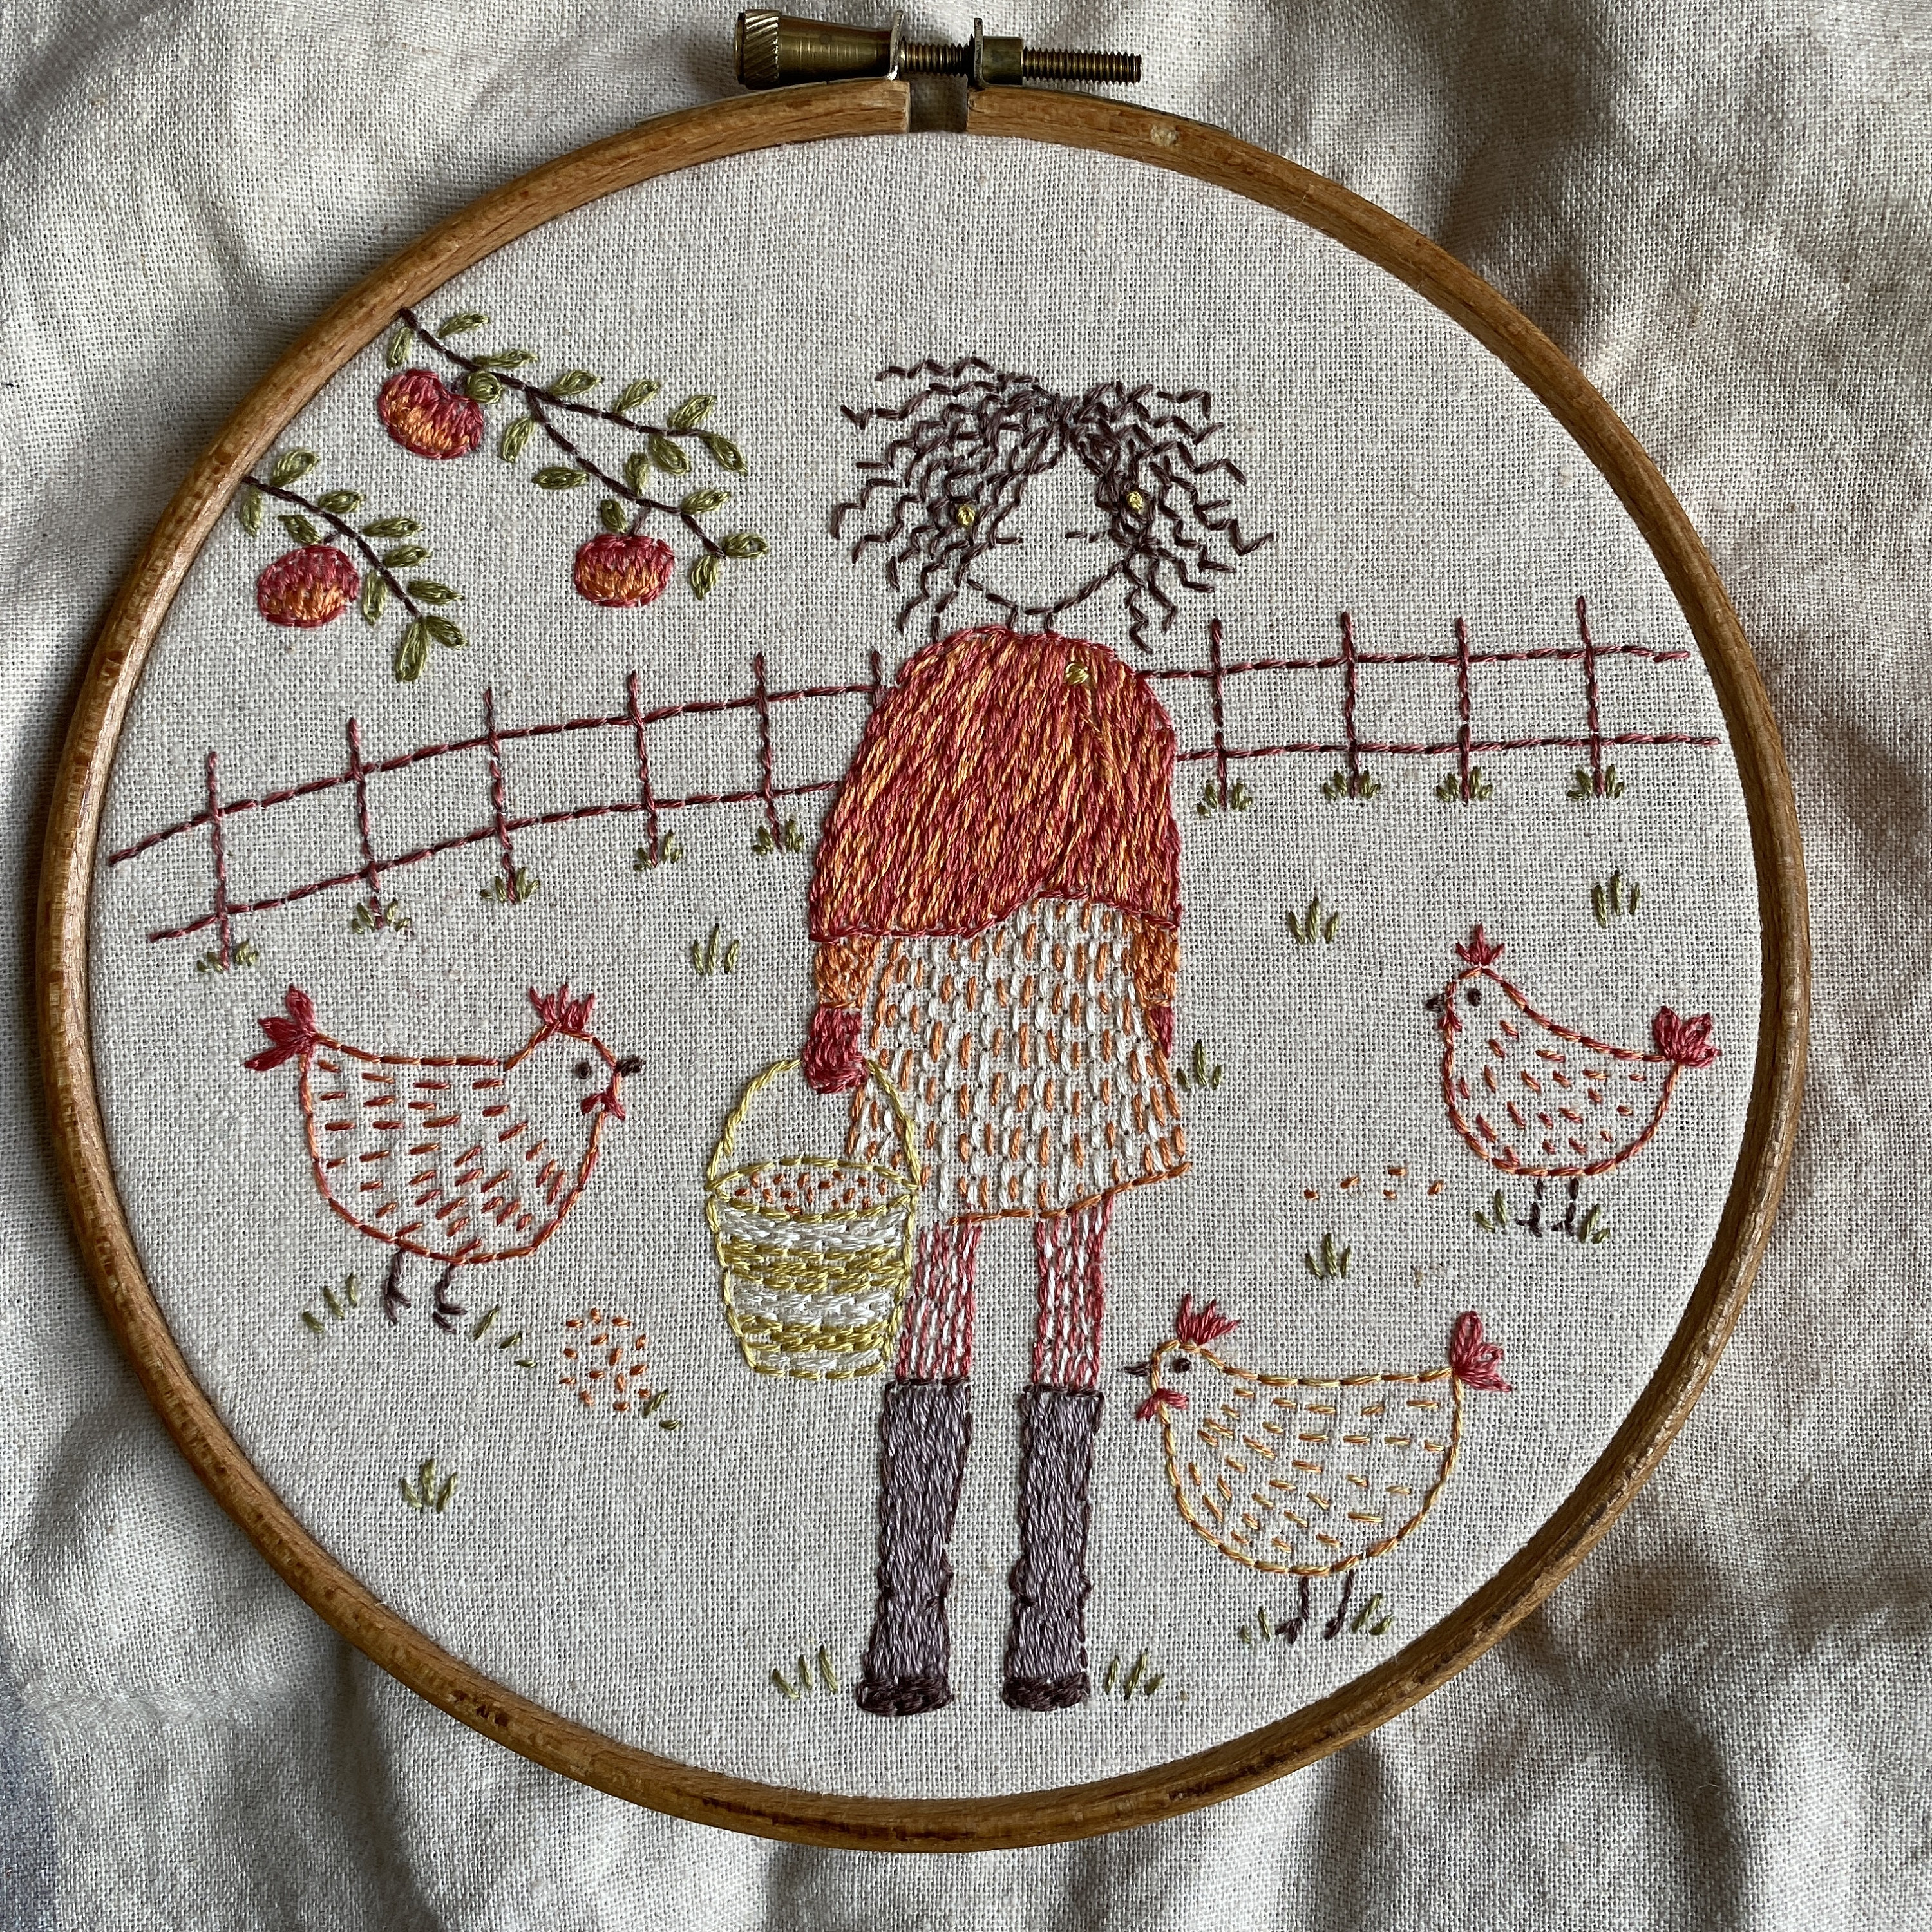 Delightful hand embroidery patterns that are free - Pintangle